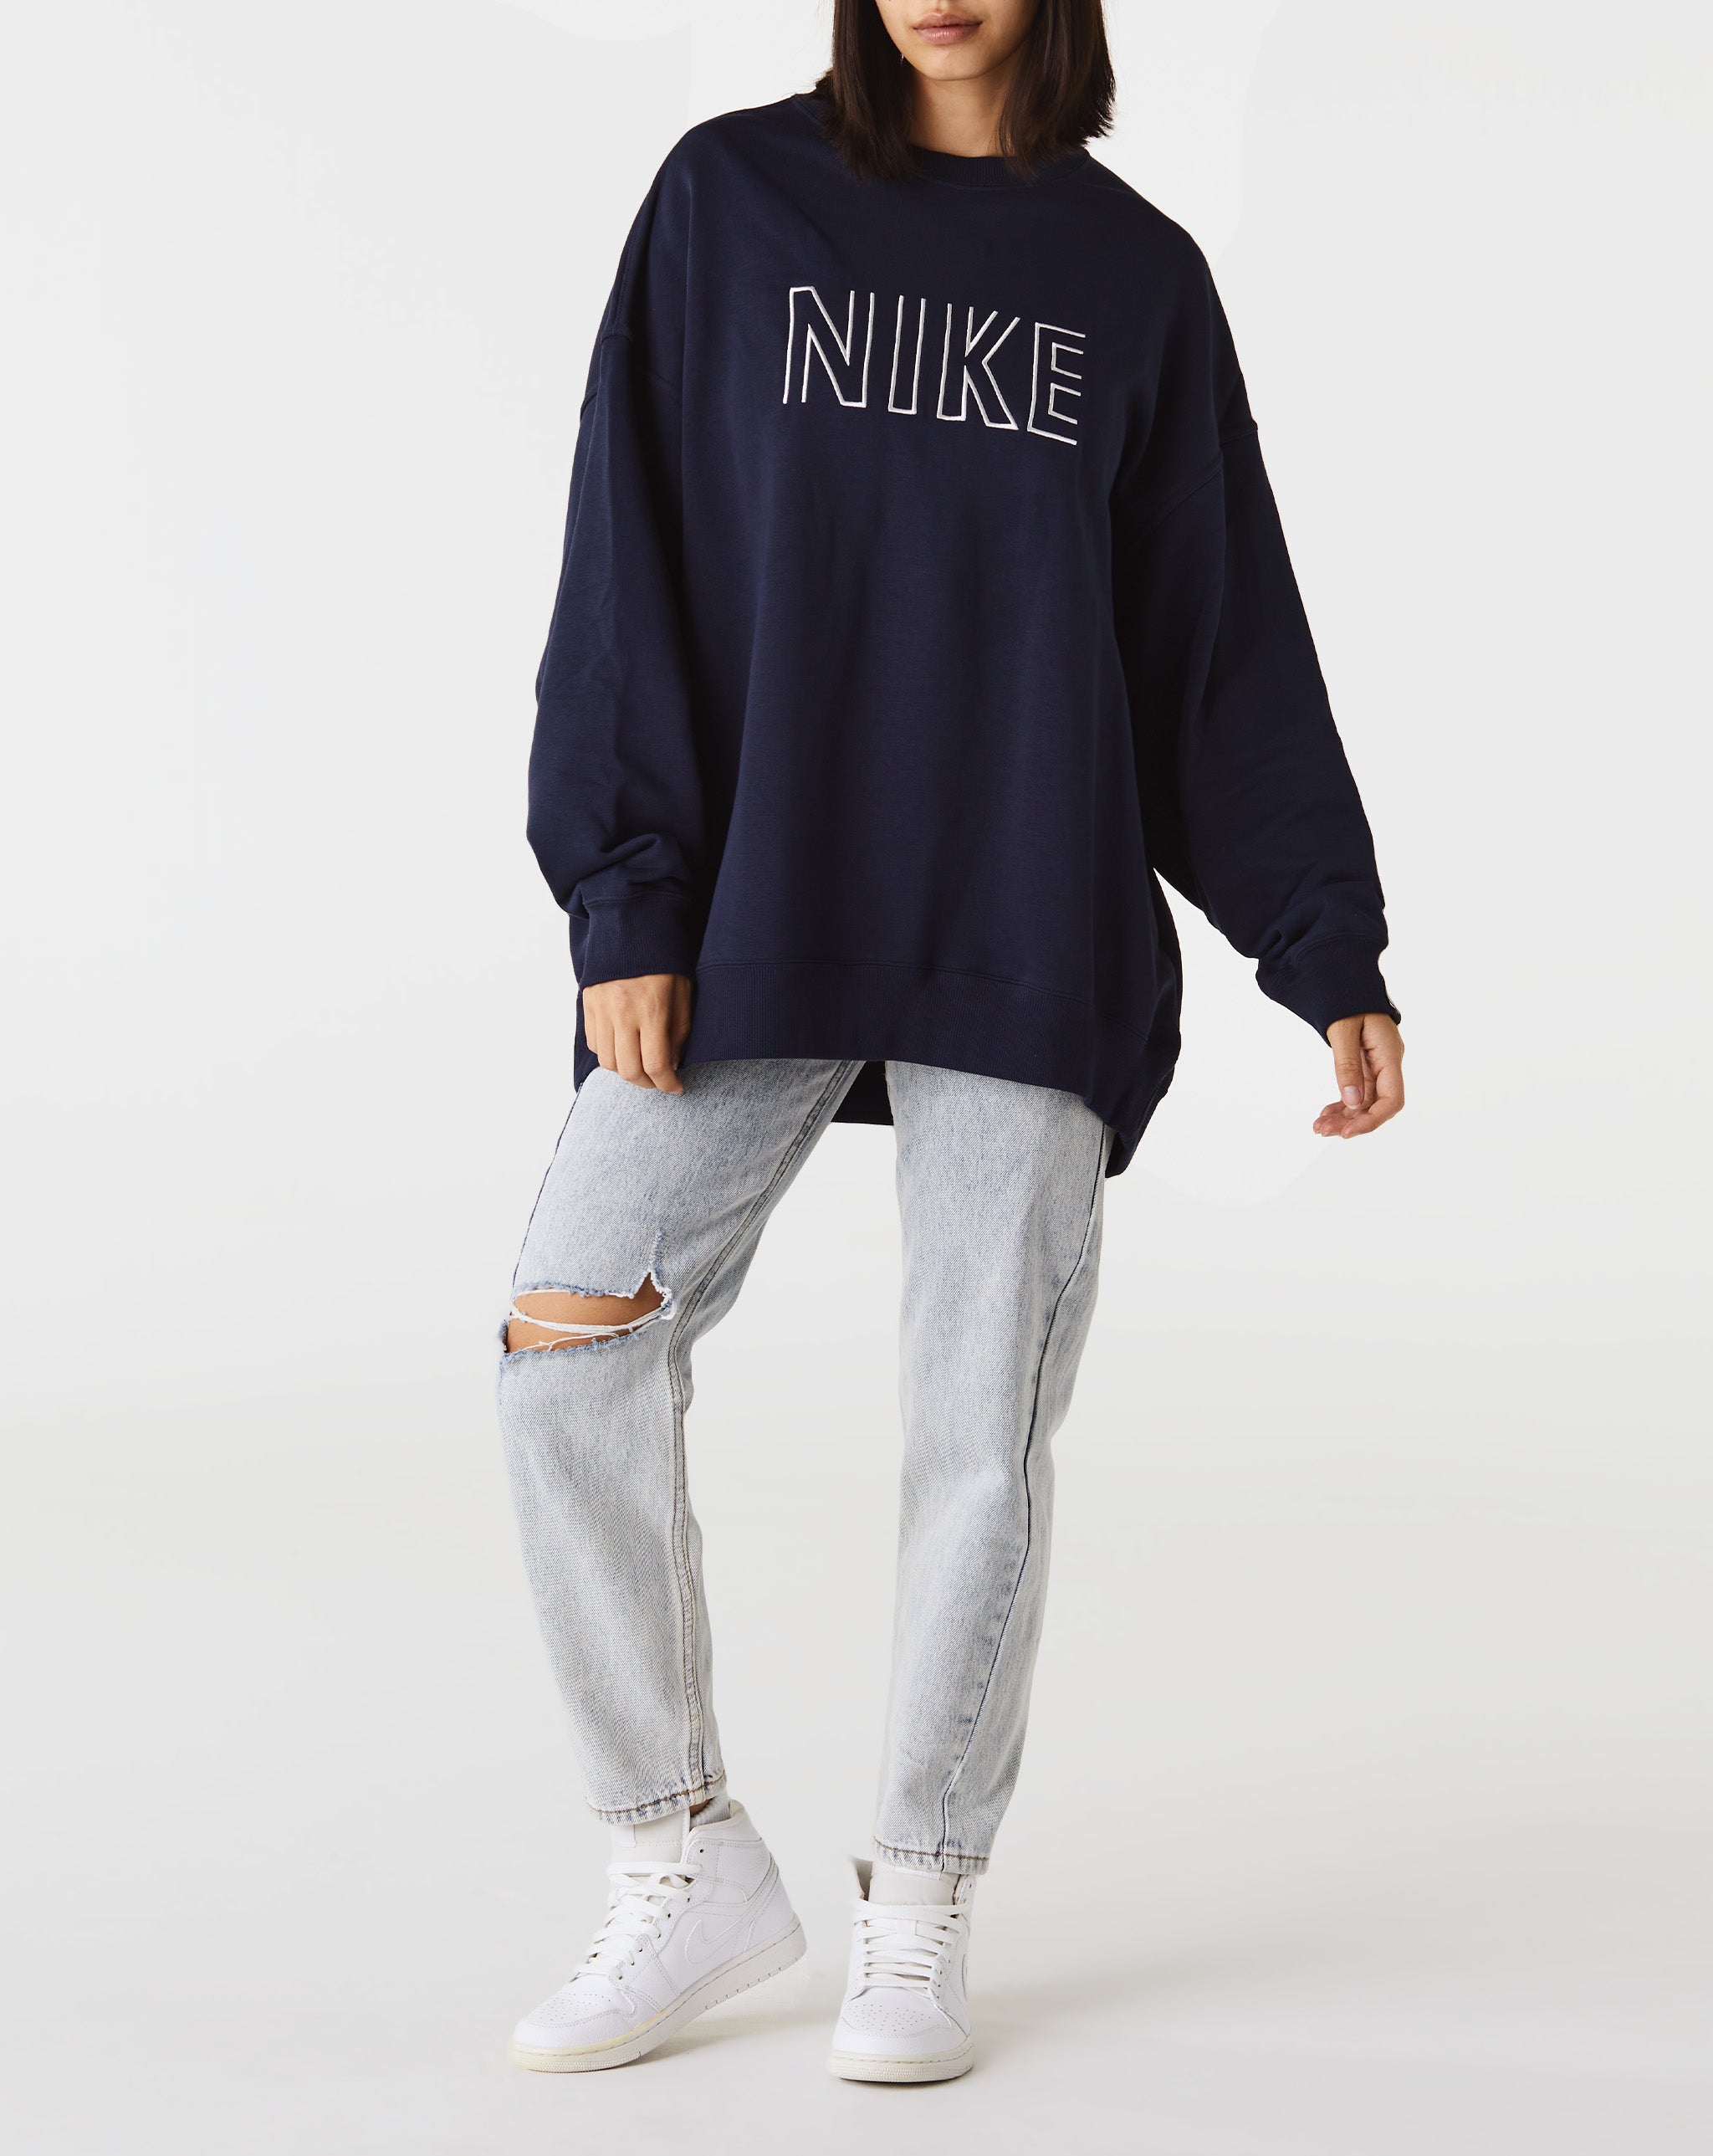 Nike Women's Oversized Embroidered Crewneck - Rule of Next Apparel